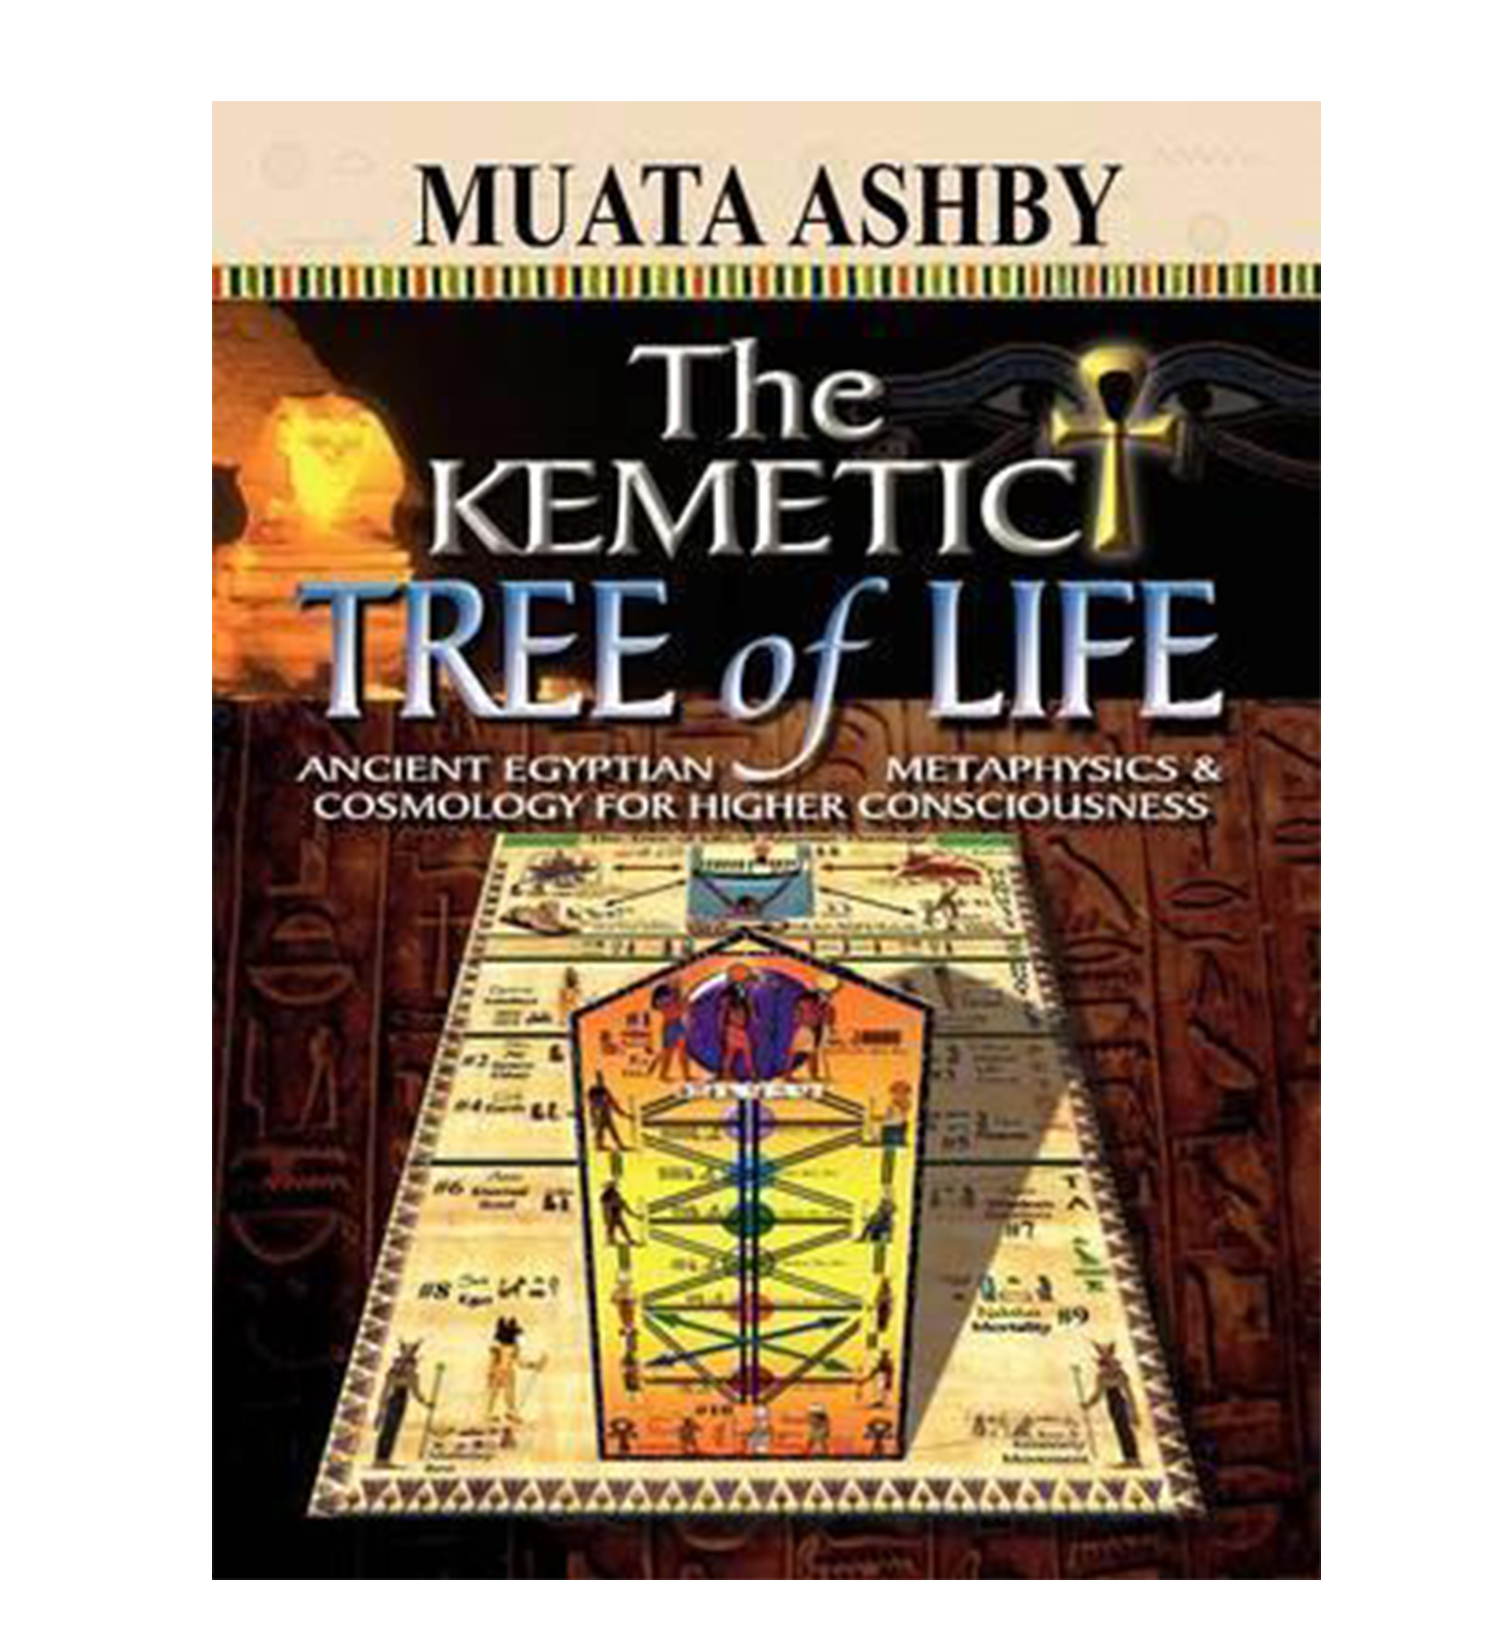 Image of book the kemetic tree of life